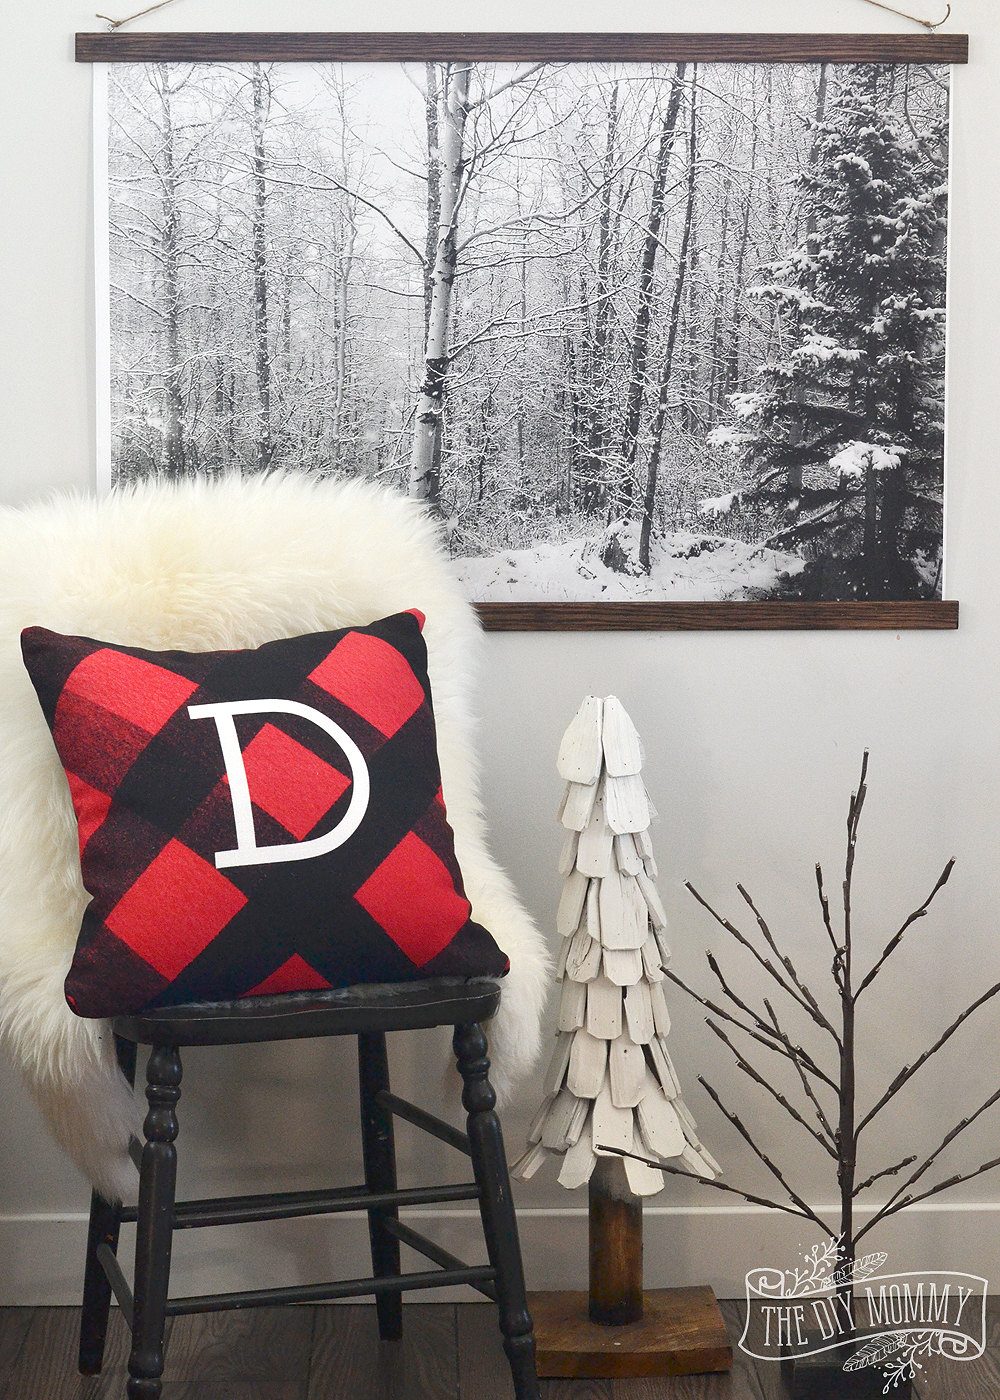 How to make a beautiful winter forest scene wall hanging - free photo download included!